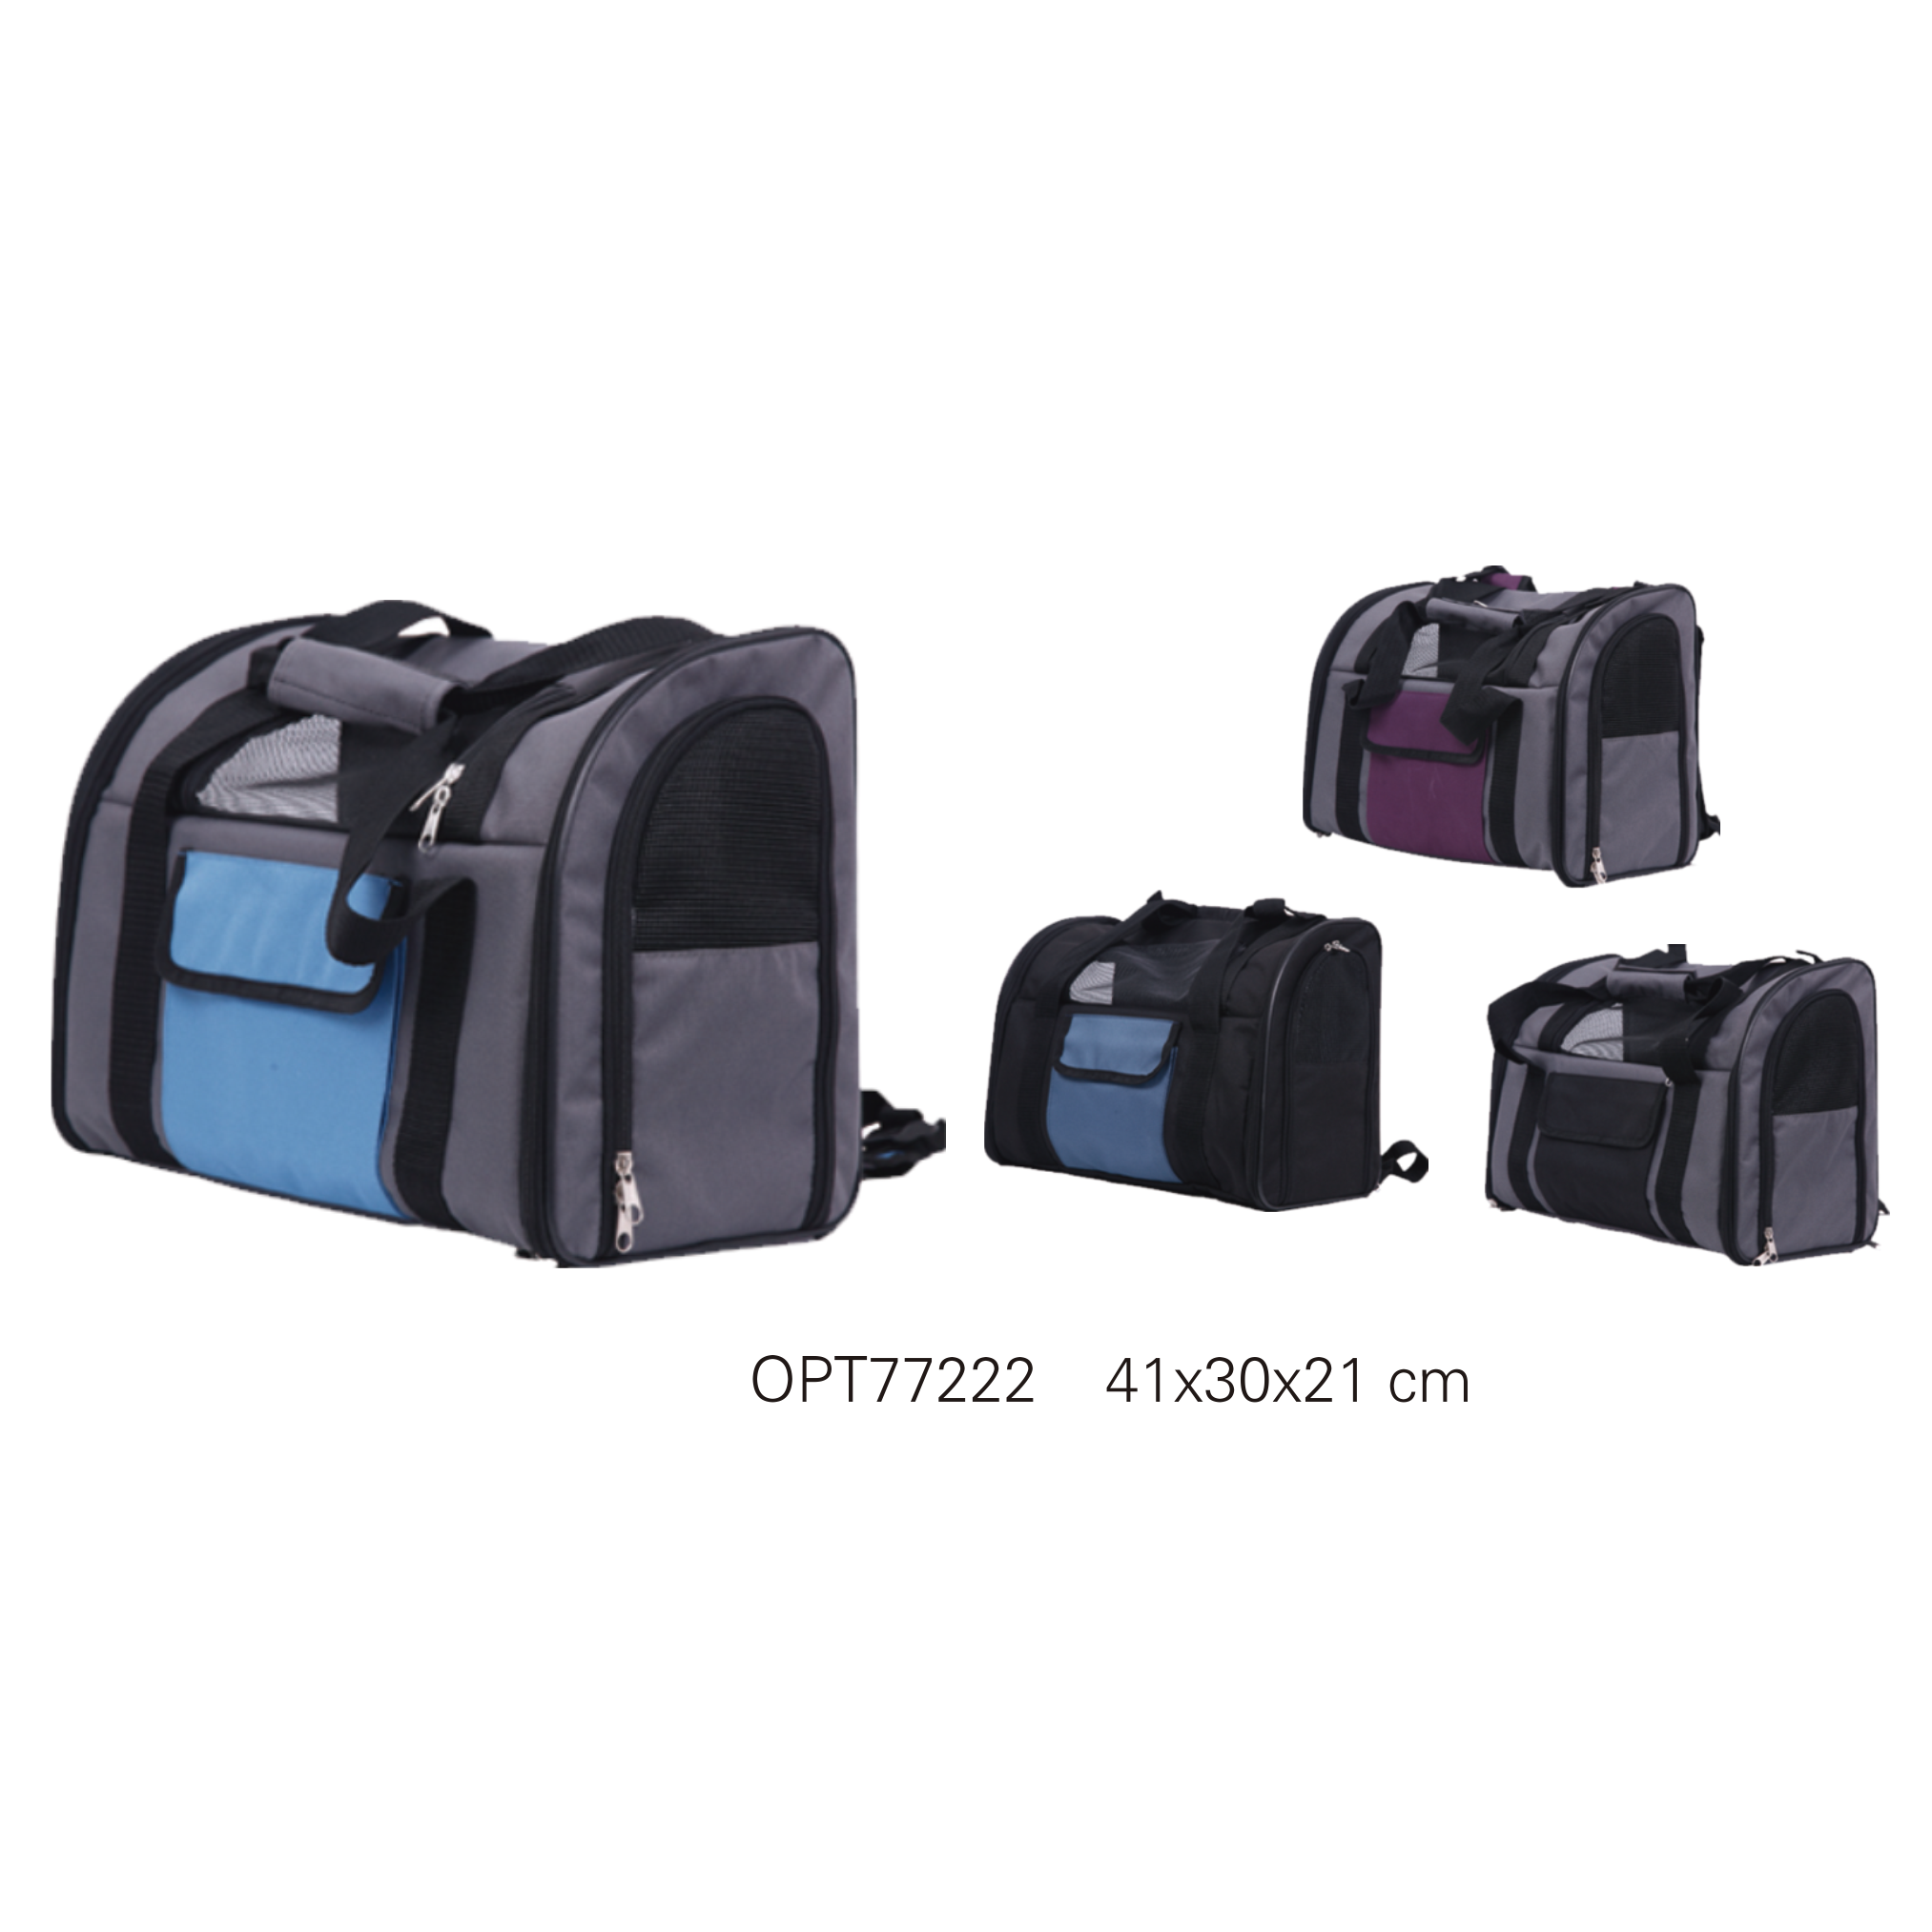 OPT77222 Pet bags & carriers